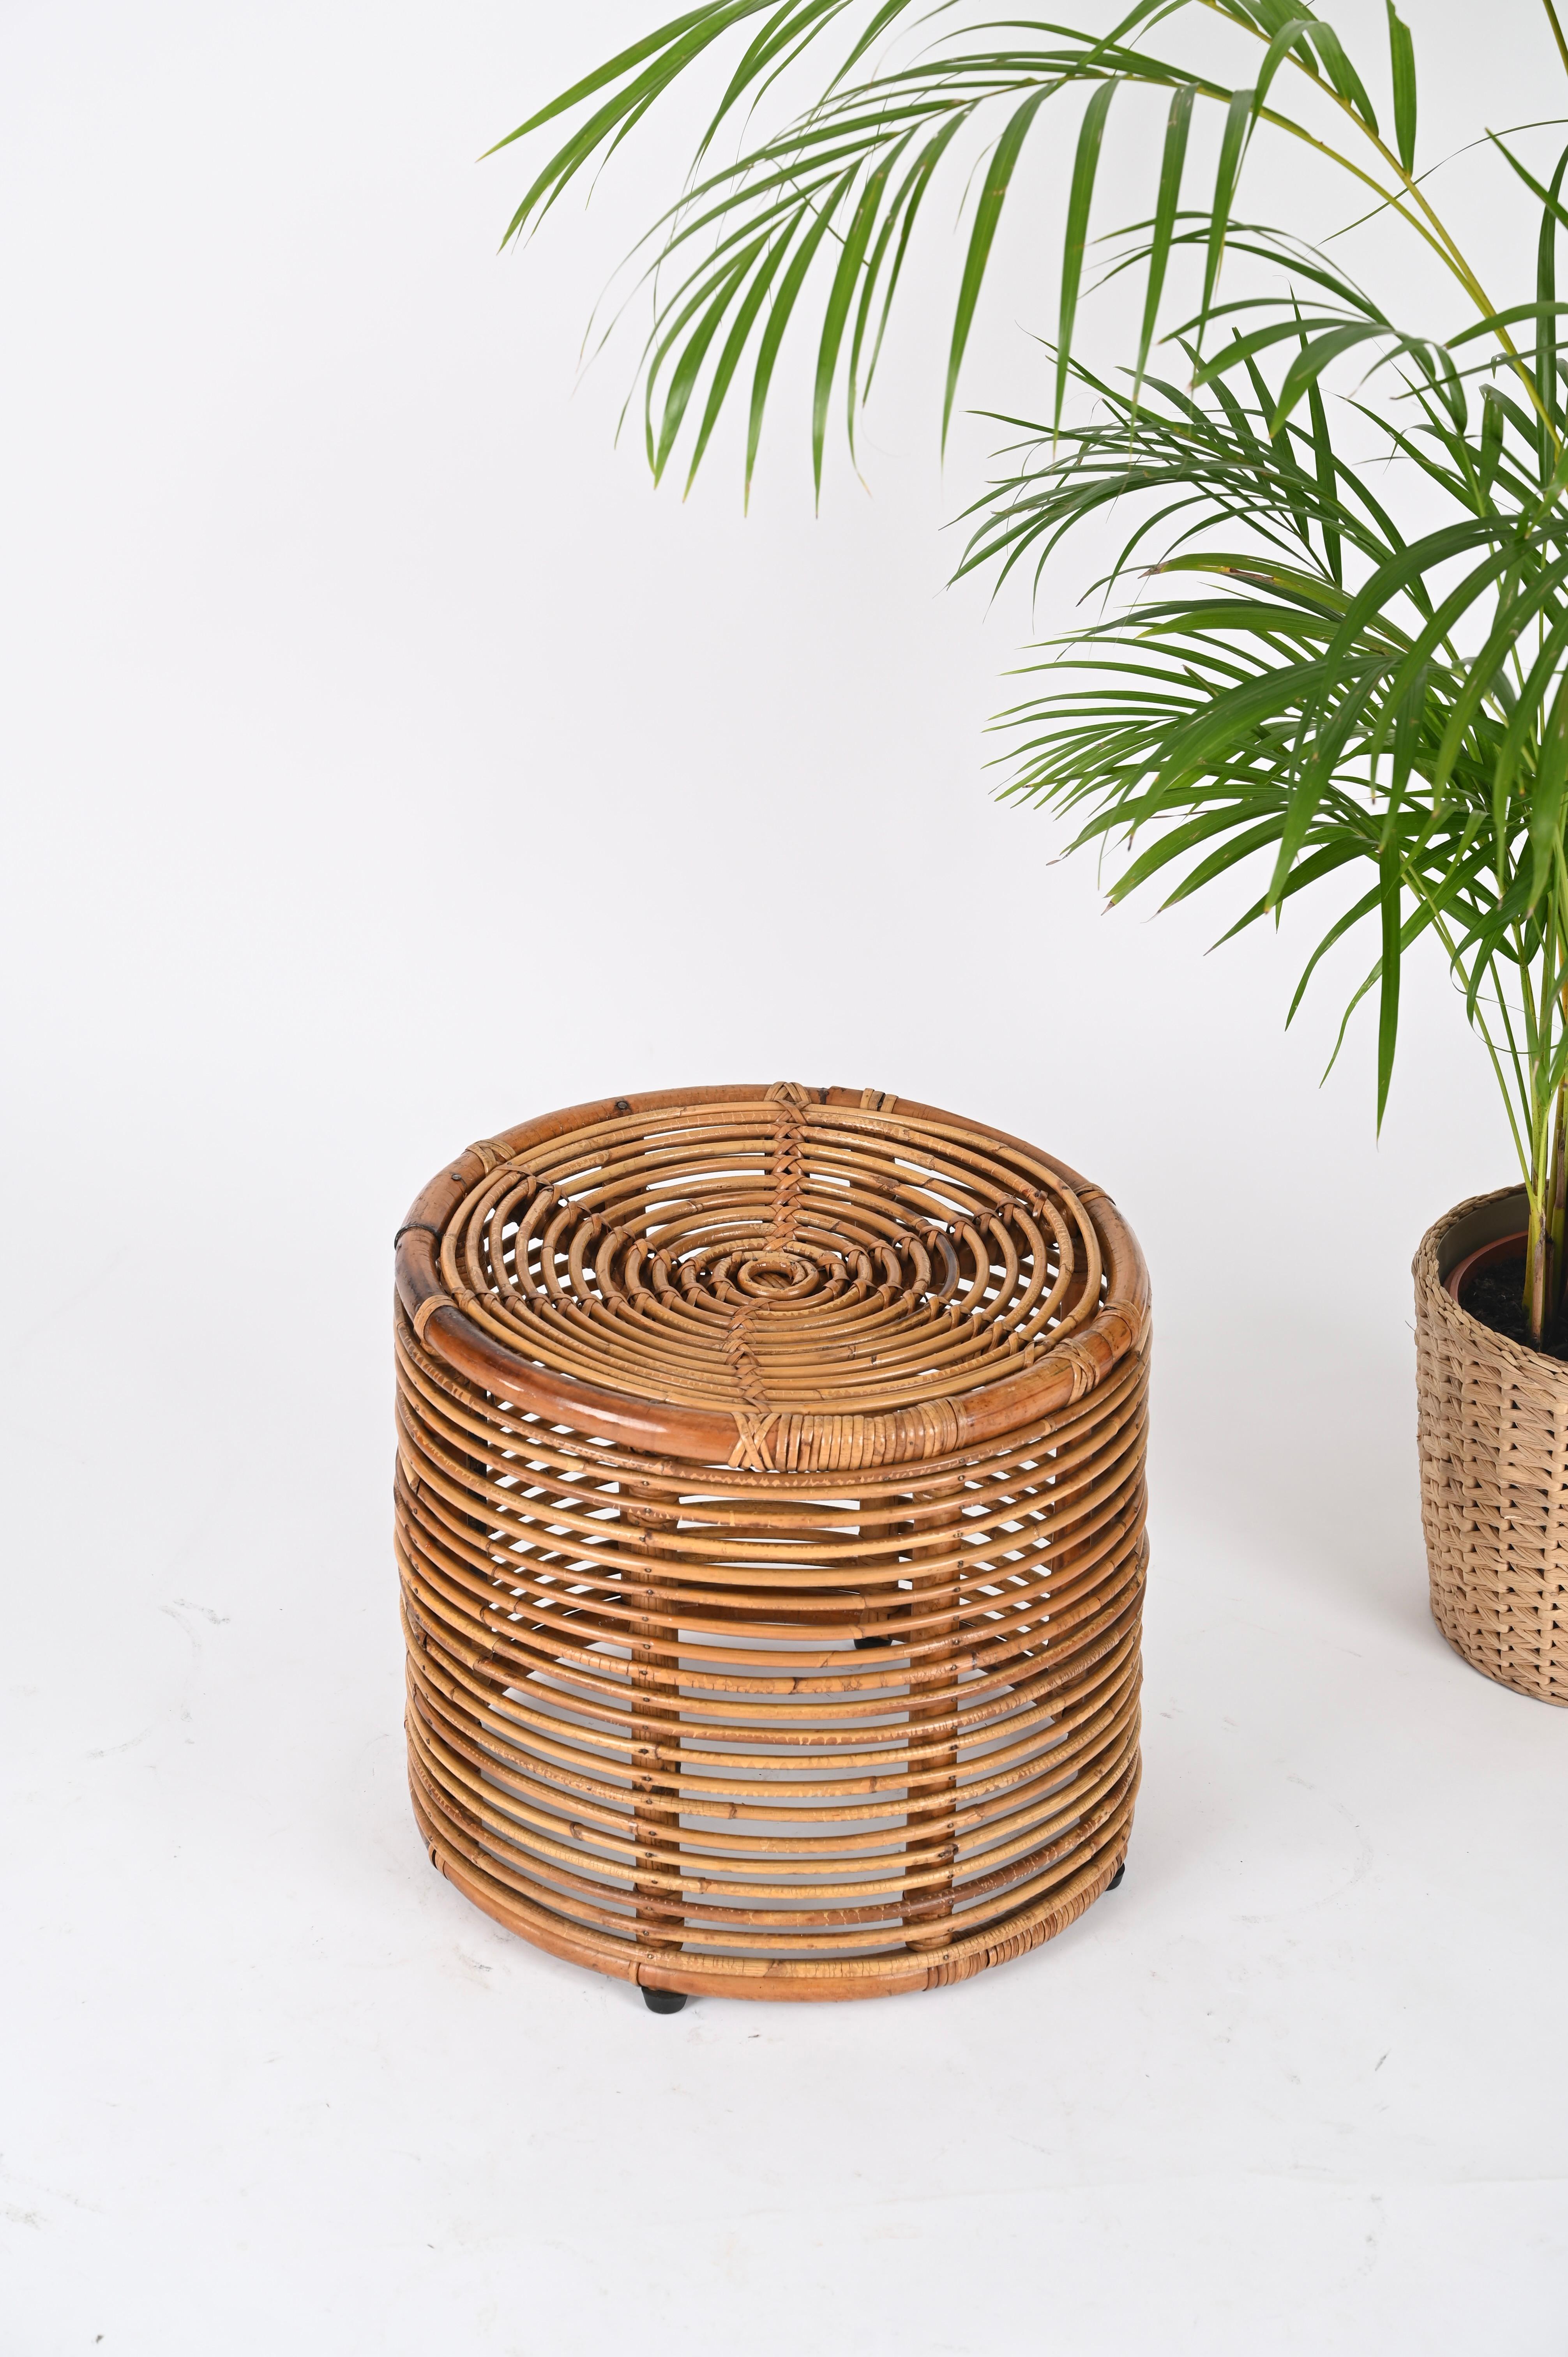 Gorgeous Tito Agnoli round pouf fully made in curved rattan and wicker. This gorgeous French Riviera style pouf was made in Italy during the 1970s.

The craftsmanship of this stool is exceptional and the rattan structure allows it to be light and